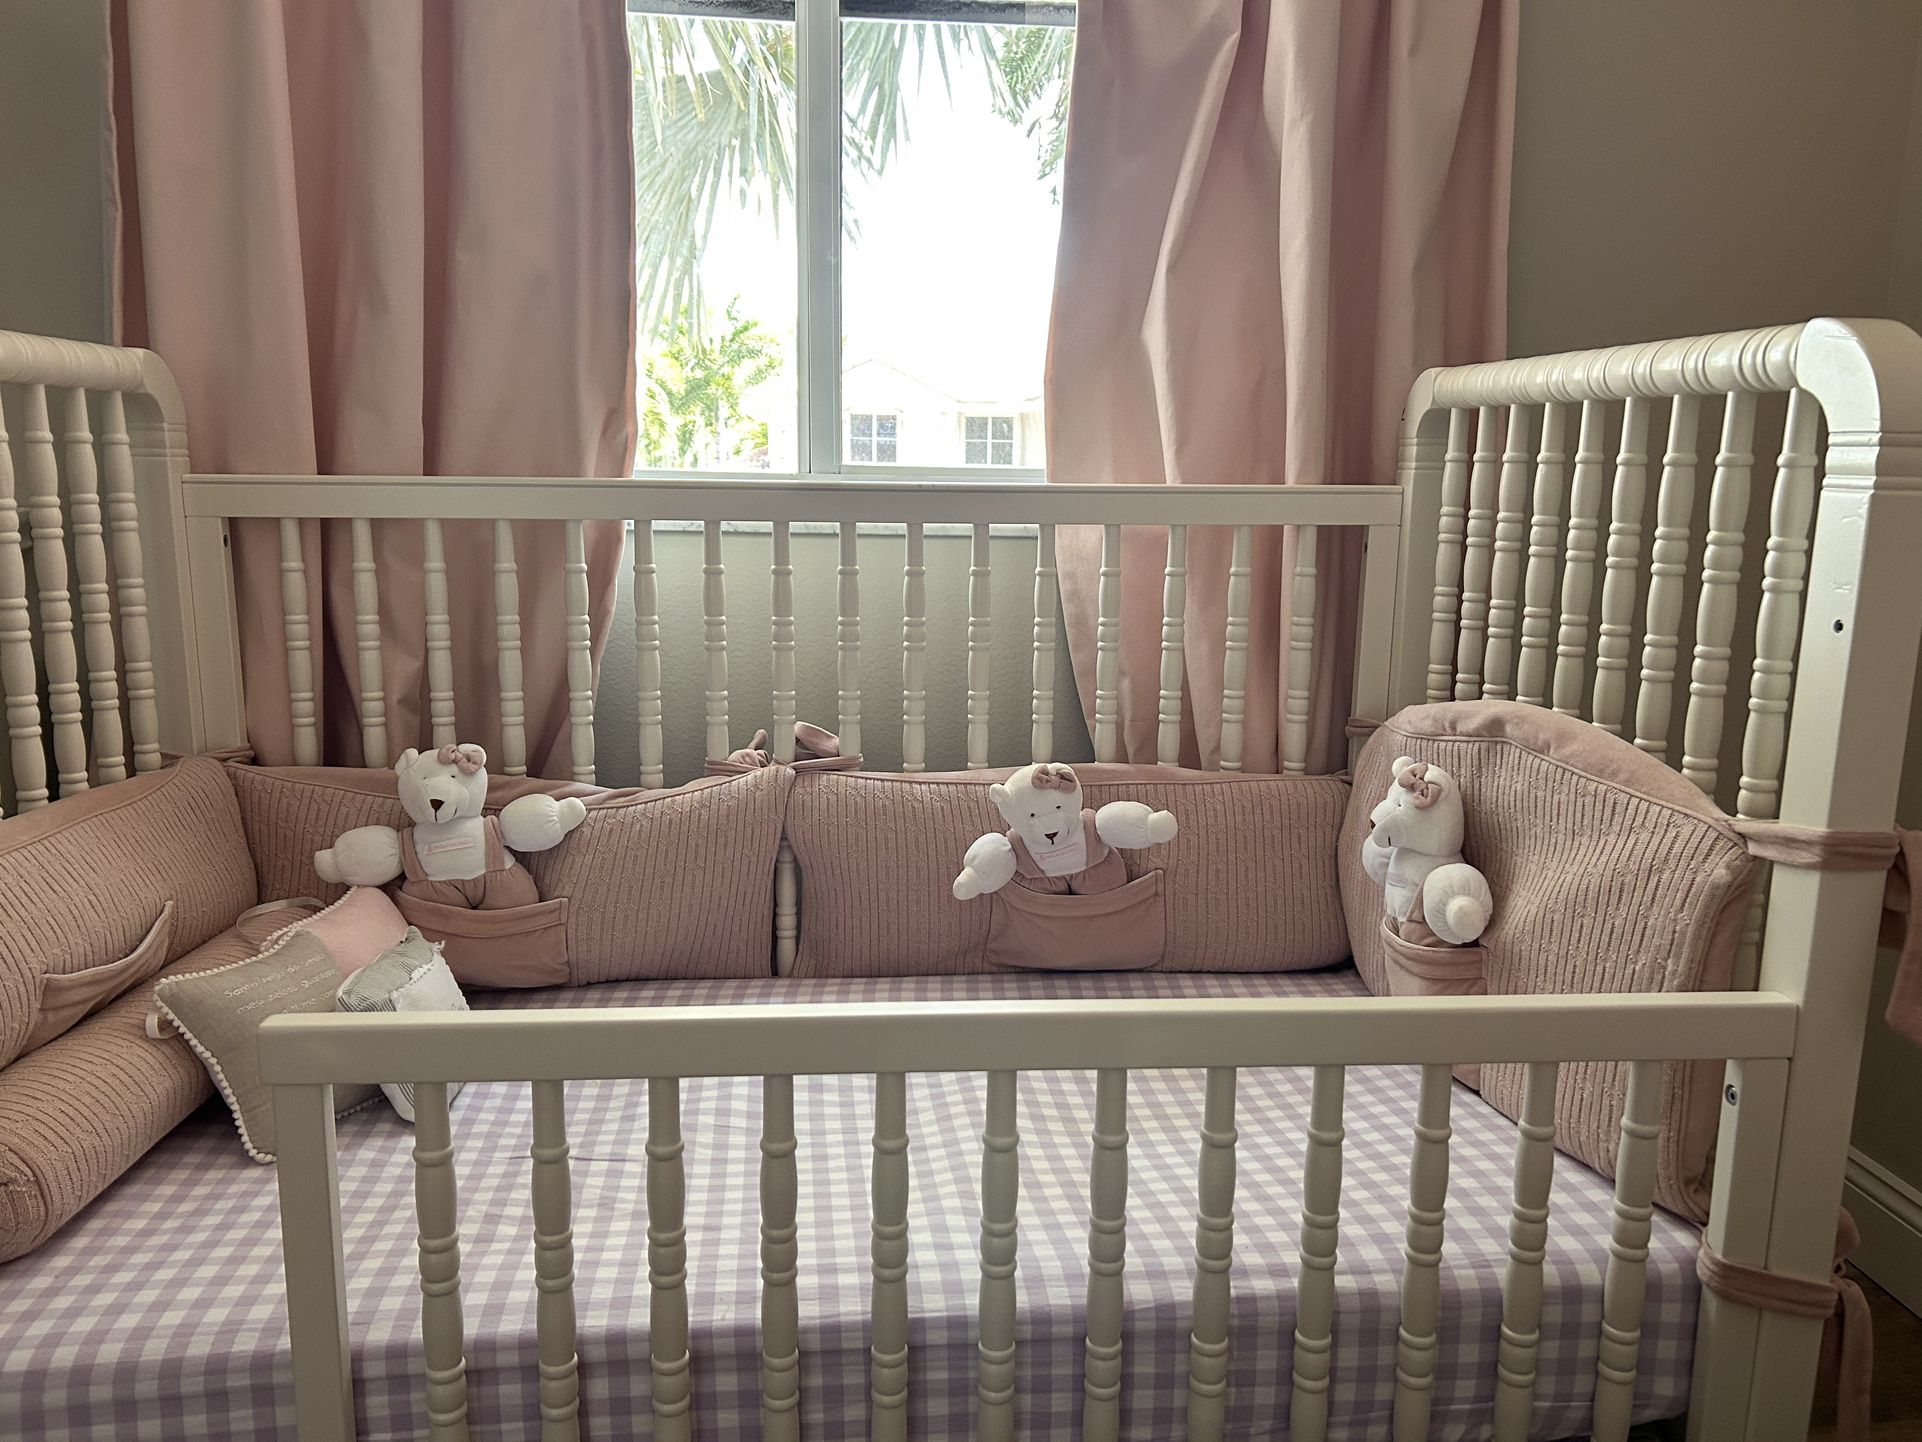 USED White Pottery Barn Elsie crib with convertible set for toddler bed $200